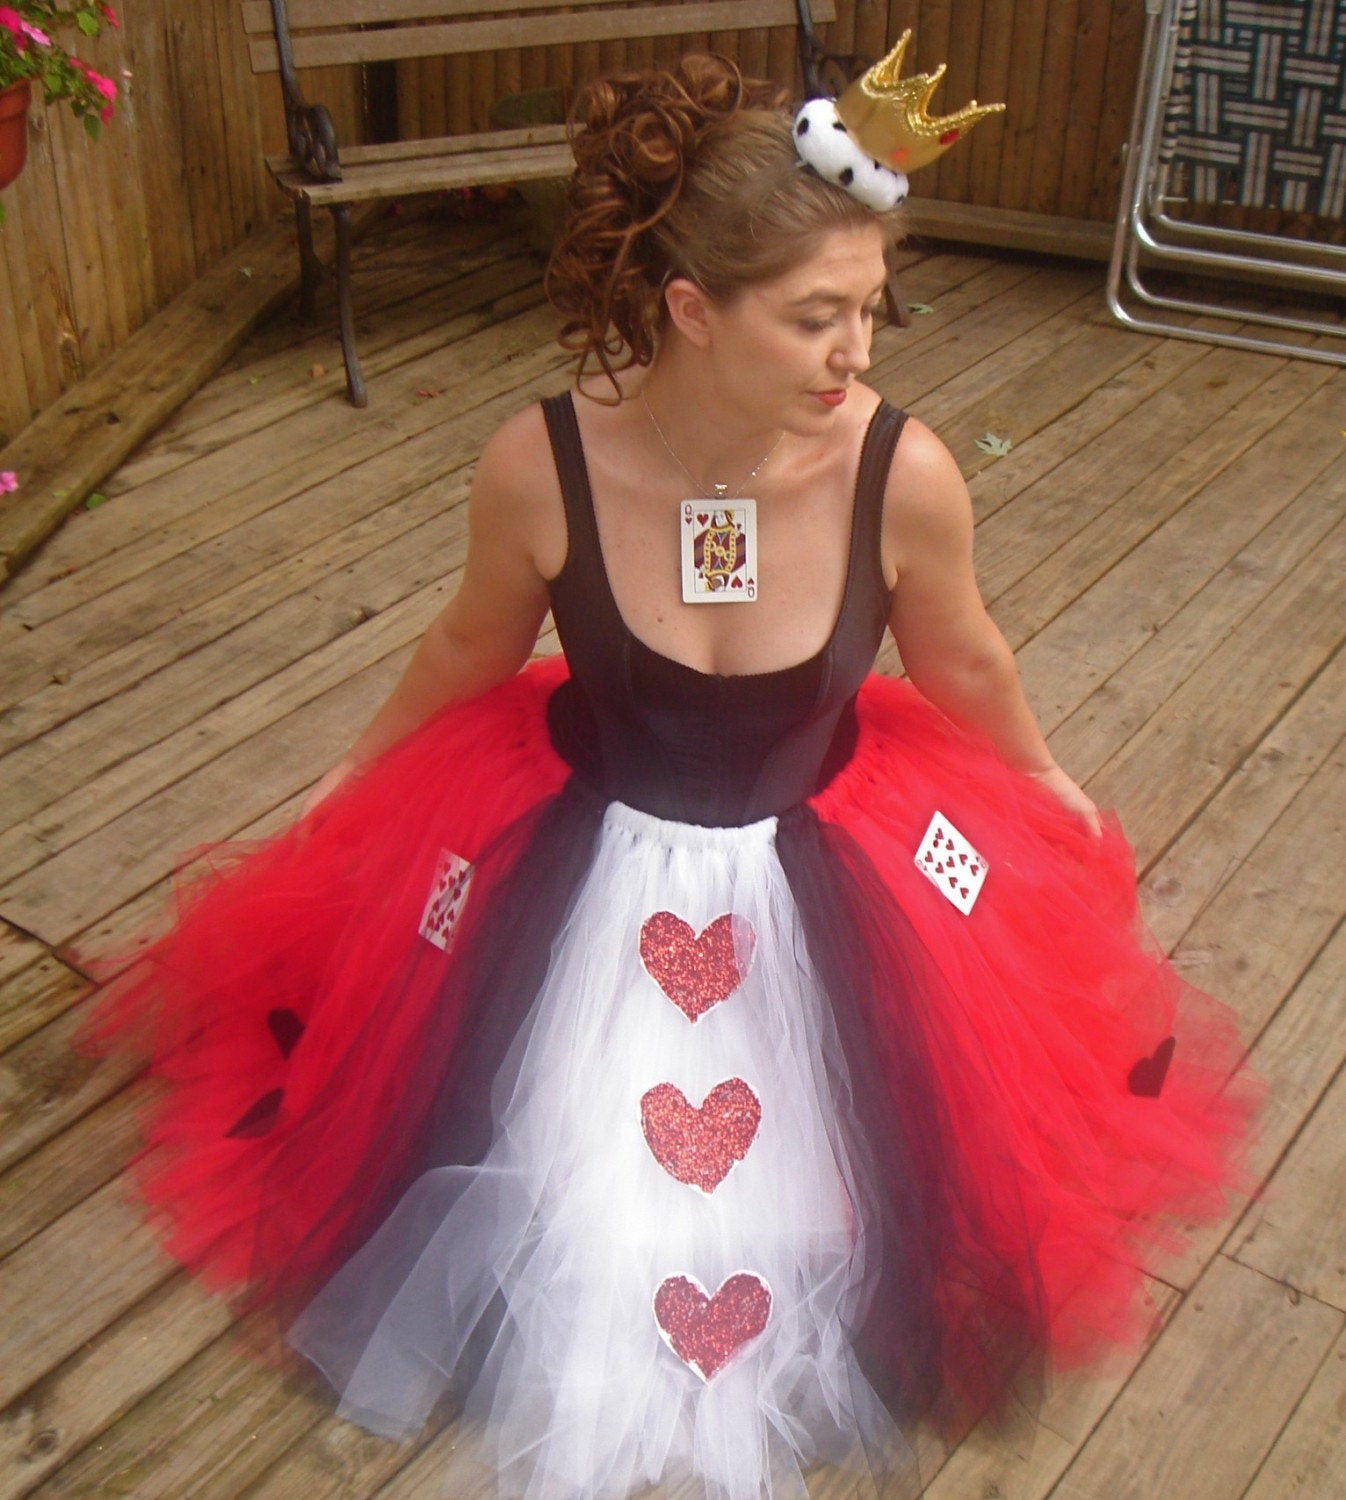 DIY Adults Halloween Costumes
 Queen of Hearts Adult Boutique Tutu Skirt Costume